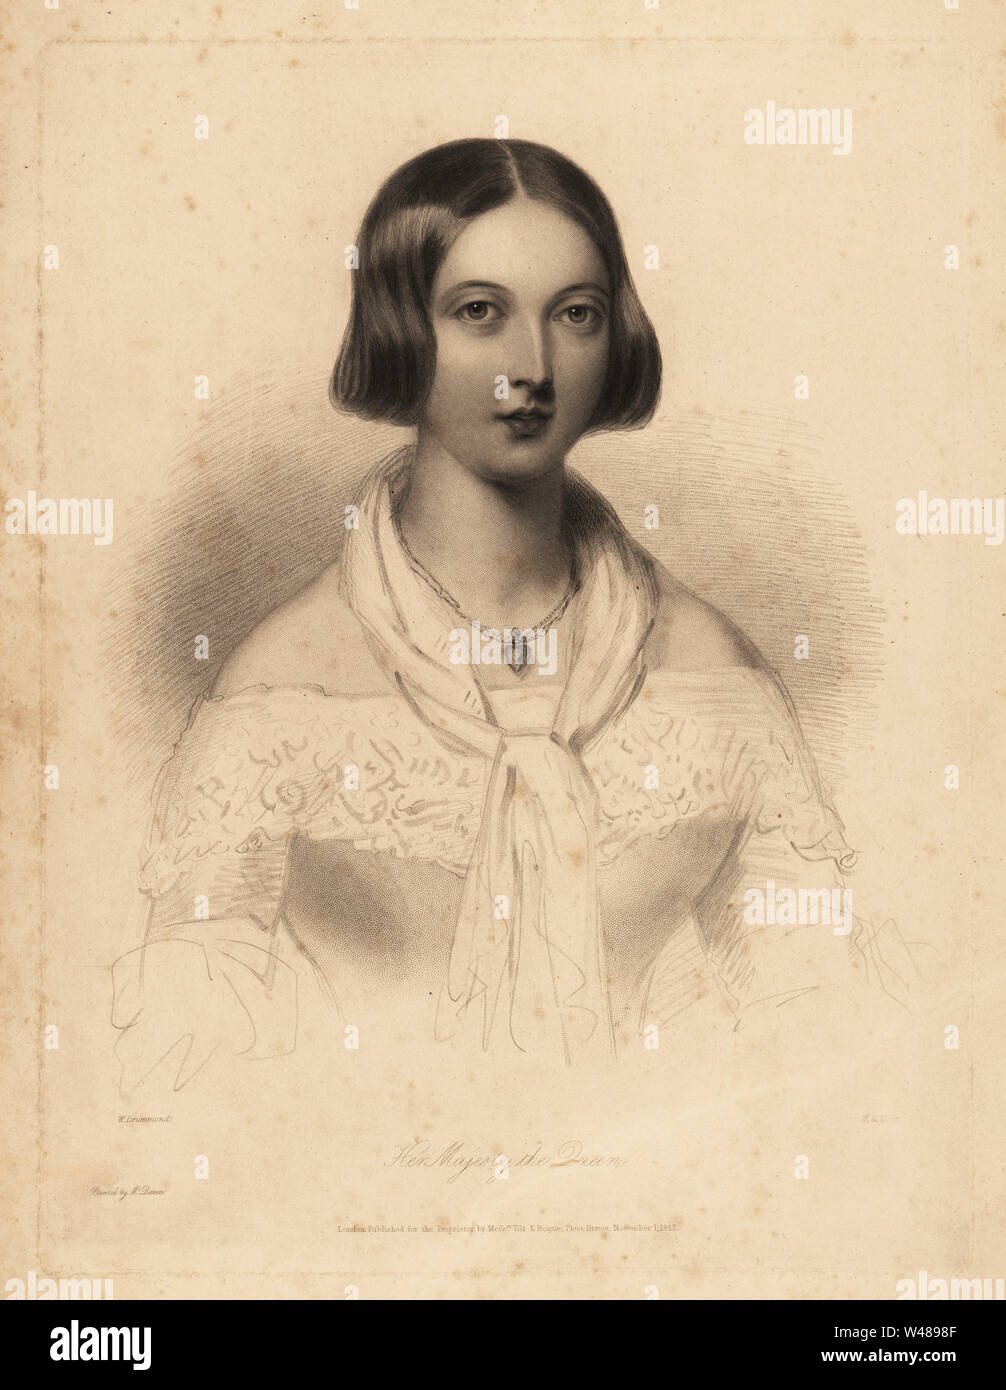 Young Queen Victoria, early 20s. Steel stipple engraving by William Henry Mote after an illustration by William Drummond from Charles Heath’s English Pearls, or Portraits for the Boudoir, Tilt and Bogue, London, 1843. Stock Photo